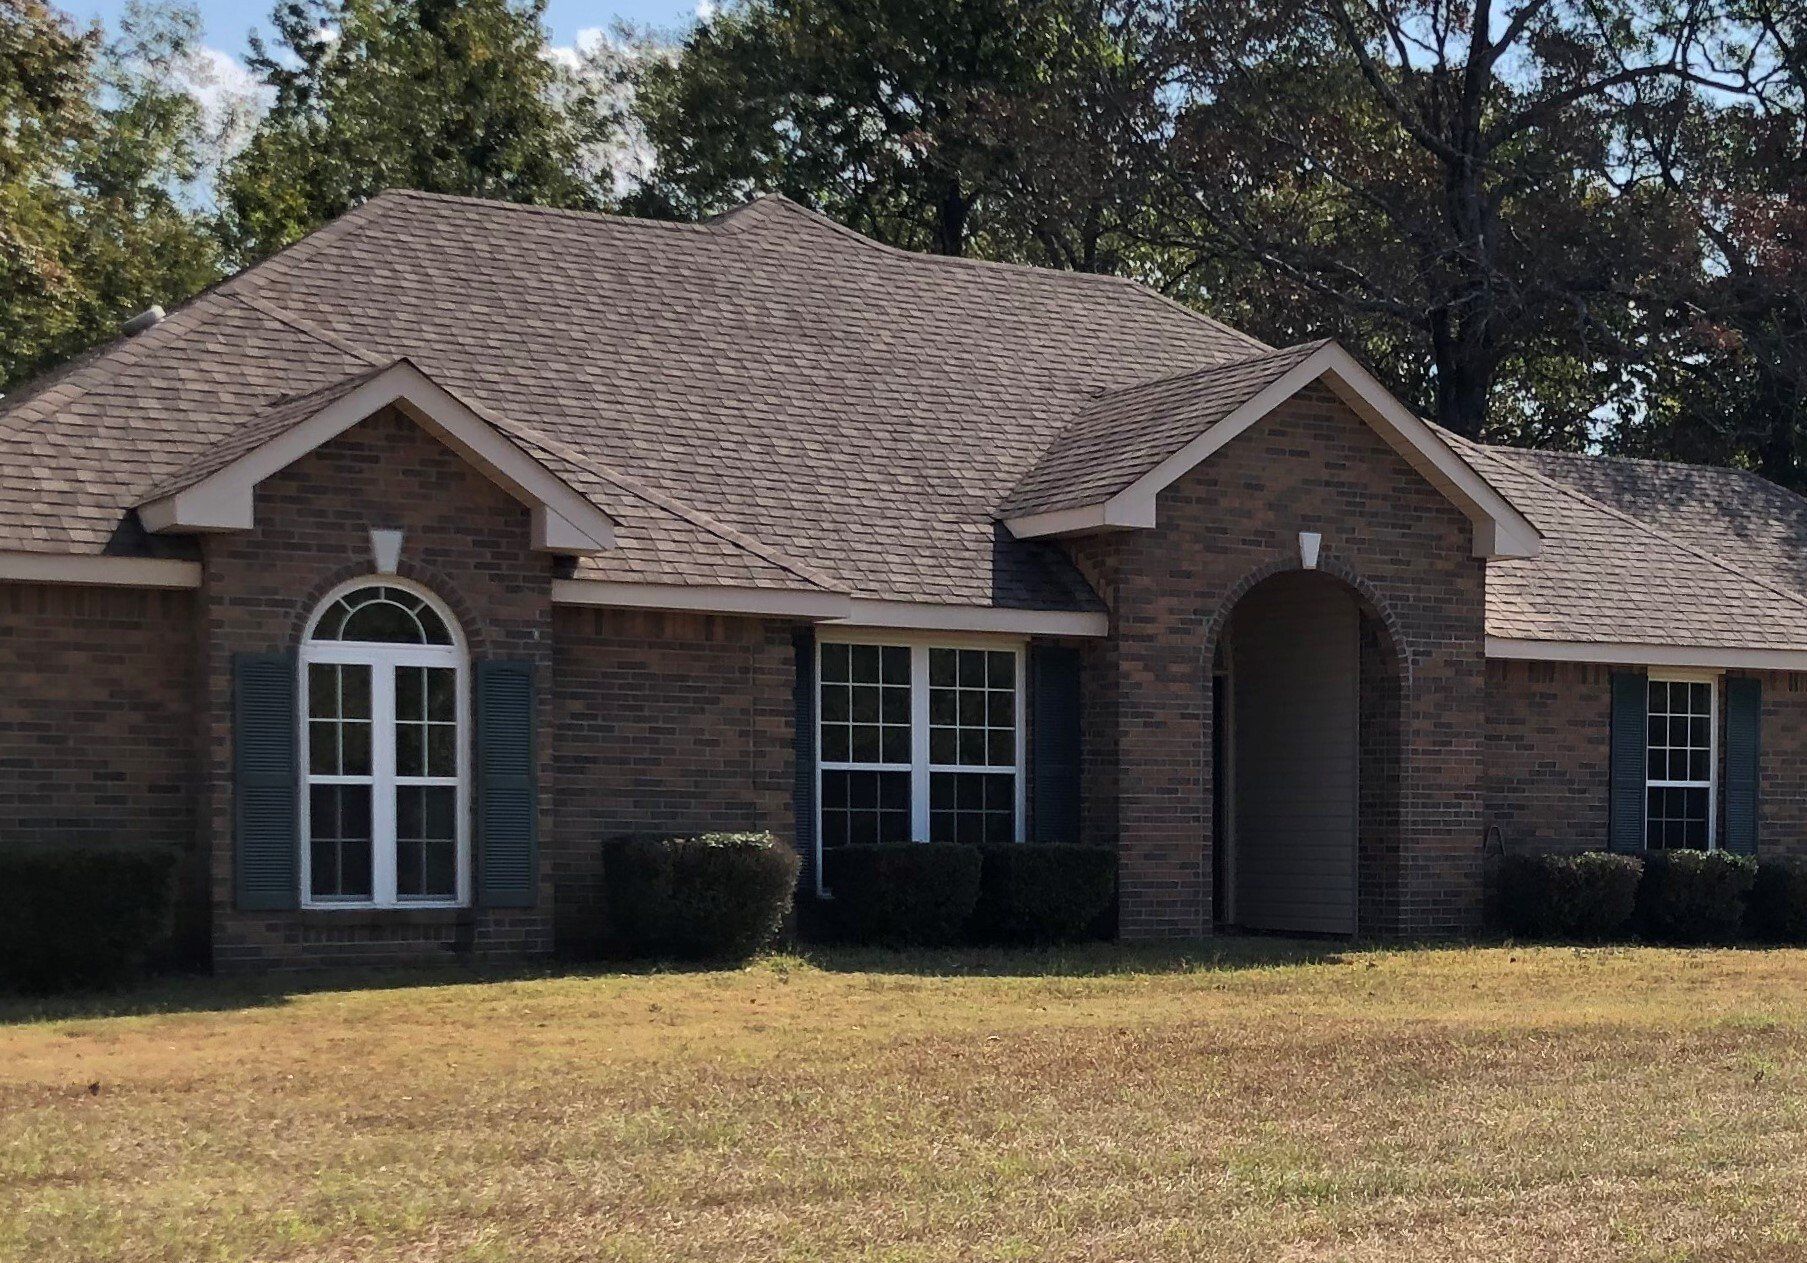 Residential tinting - Visibility was enhanced along with real energy efficiency after SPF residential tint in Wetumpka, AL